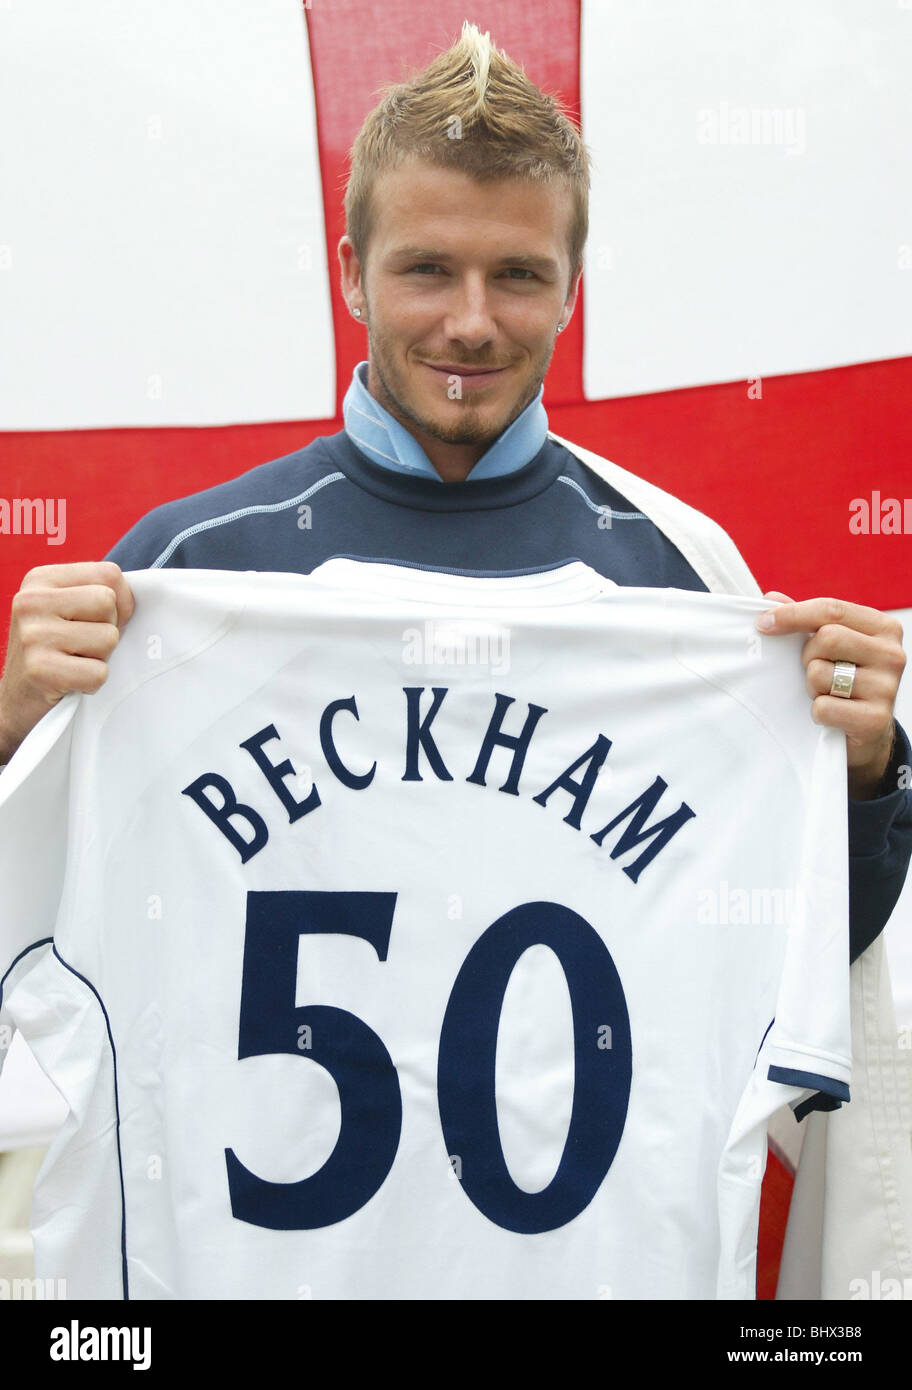 David Beckham, May 2002 The England football captain is photographed draped with the cross of St George on Awaji Island, Japan Holding up his 'Beckham 50' shirt Stock Photo